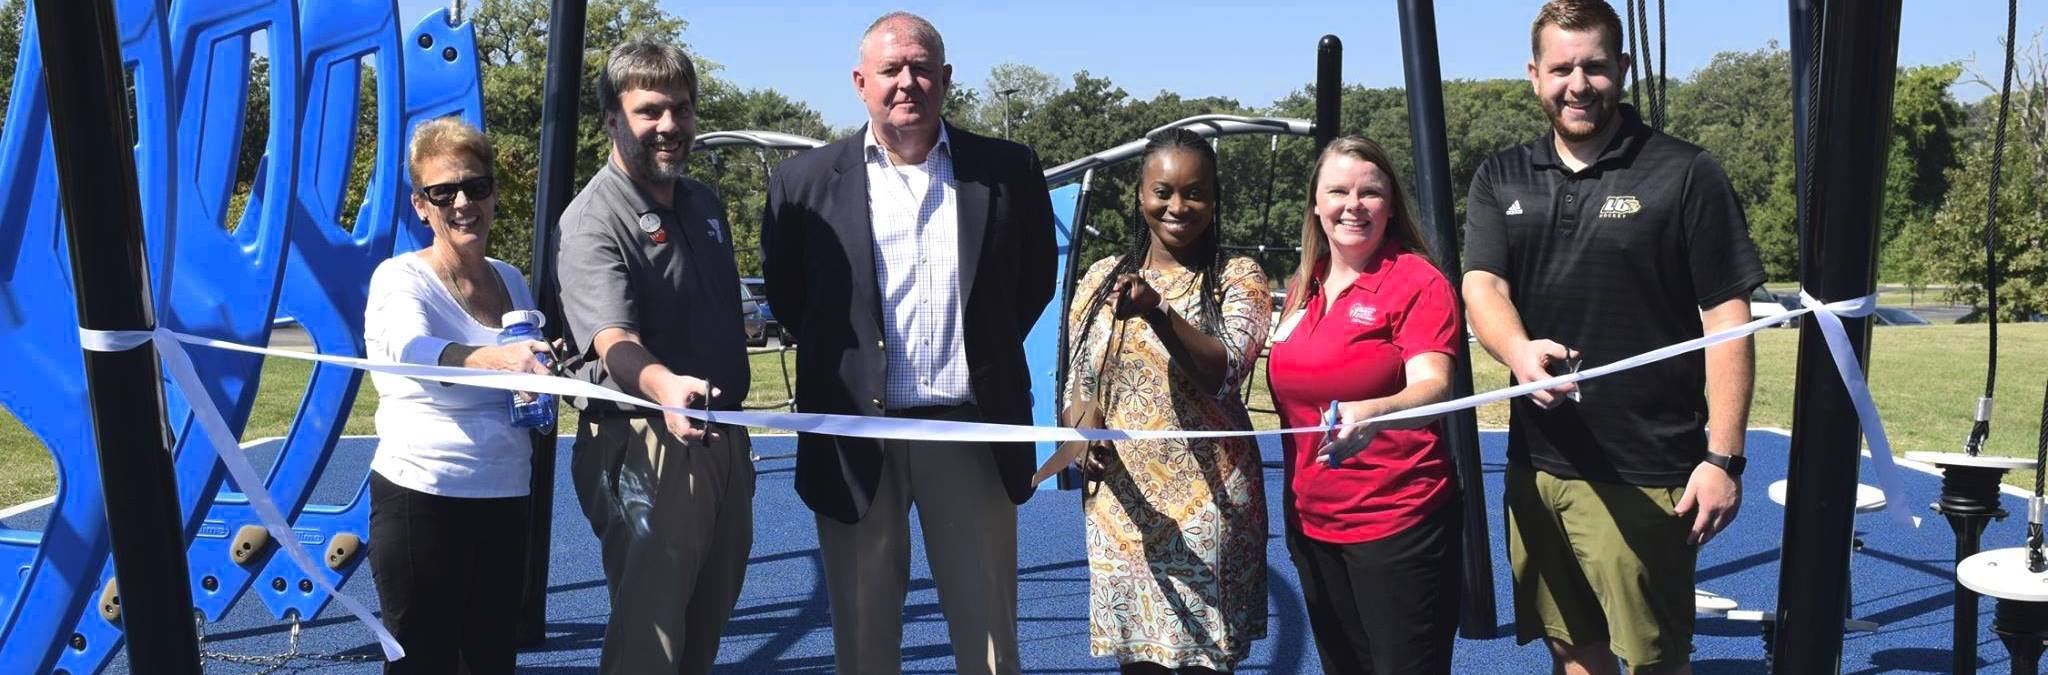 YMCA Accepts the Challenge with Custom Challenge Course